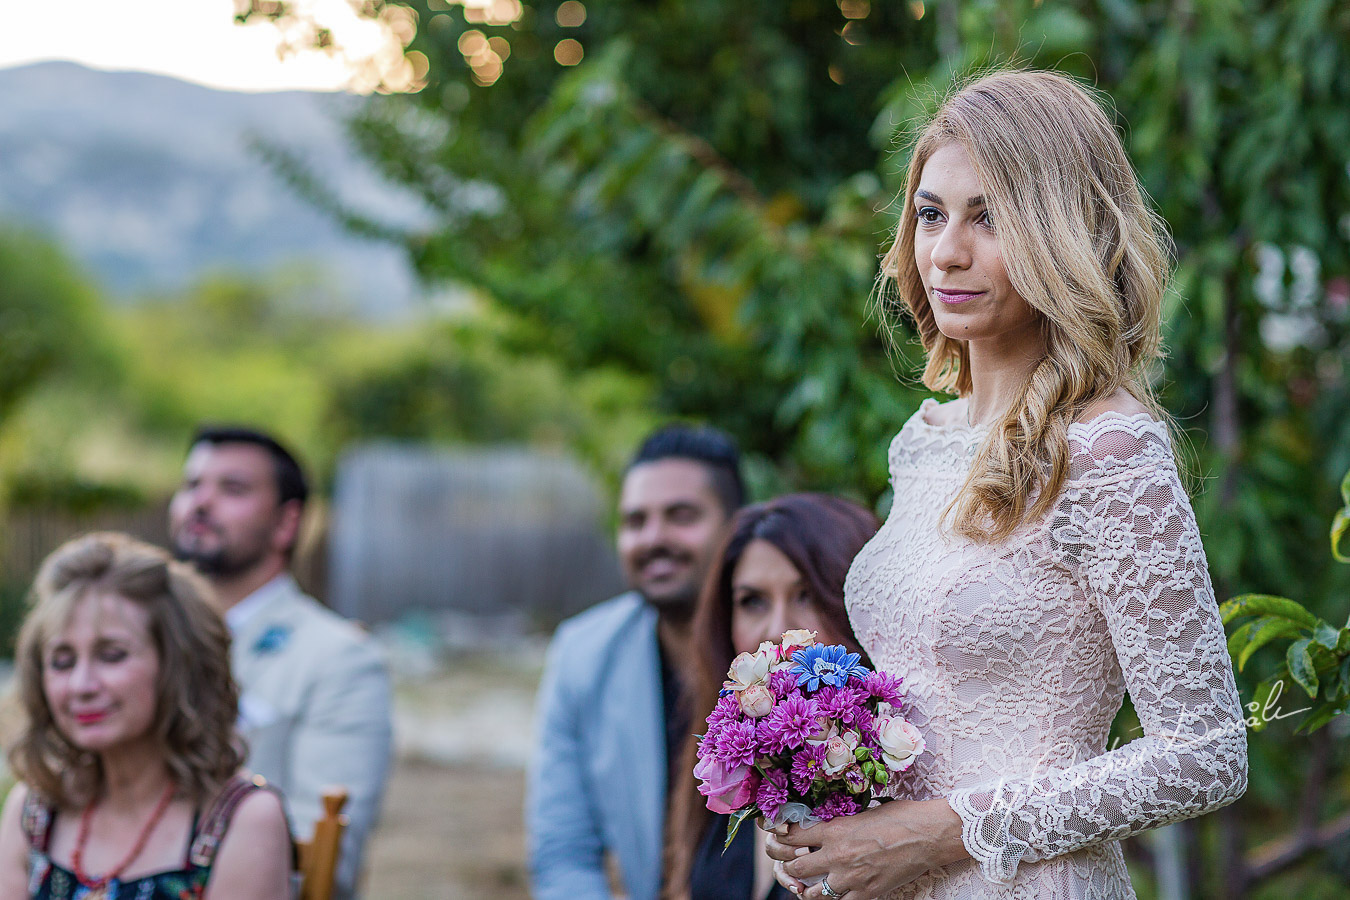 Emotional moments captured at a beautiful bohemian wedding in Trimiklini, Cyprus.